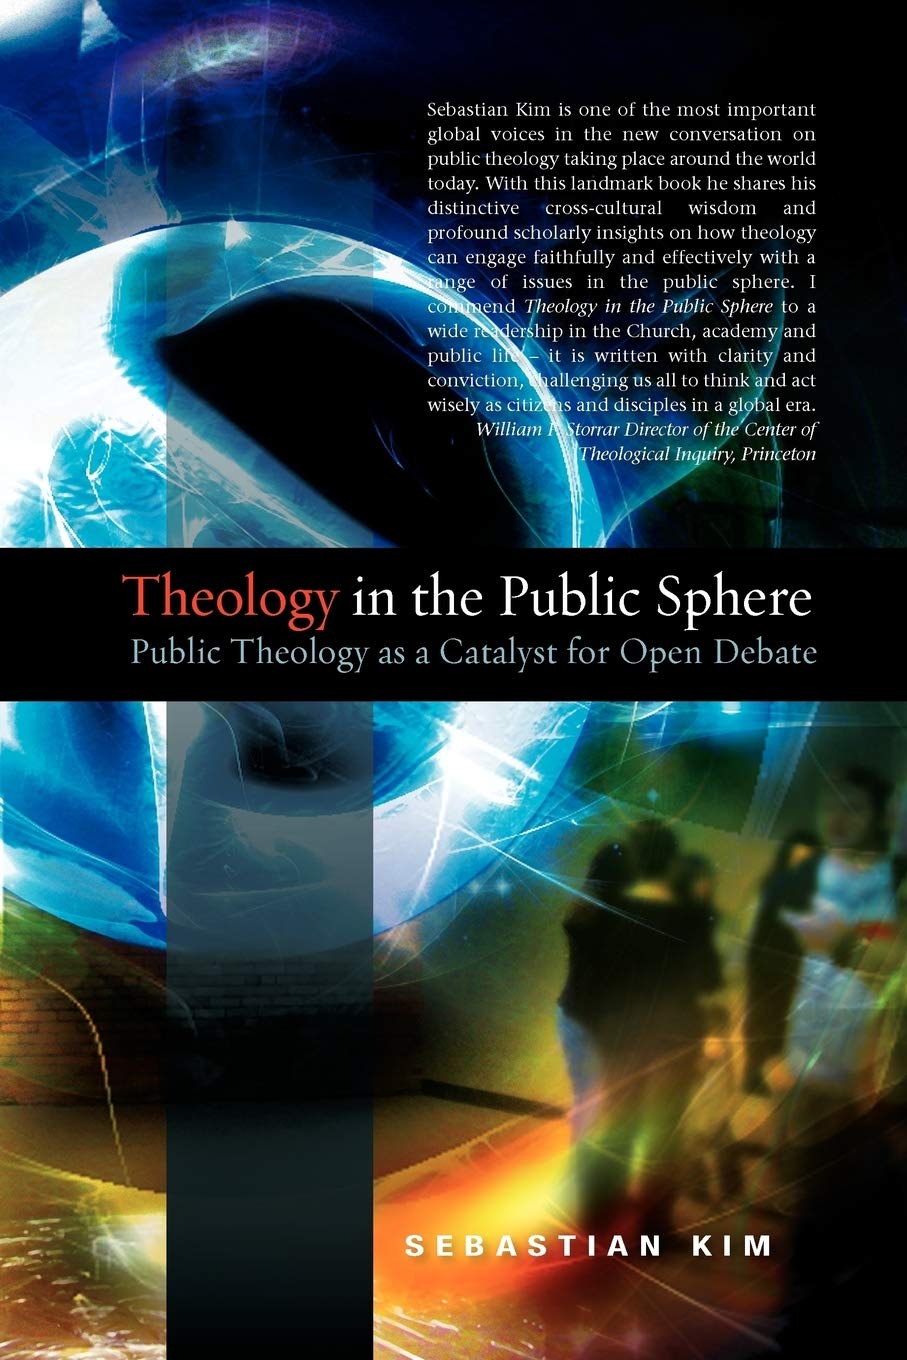 Theology in the Public Square